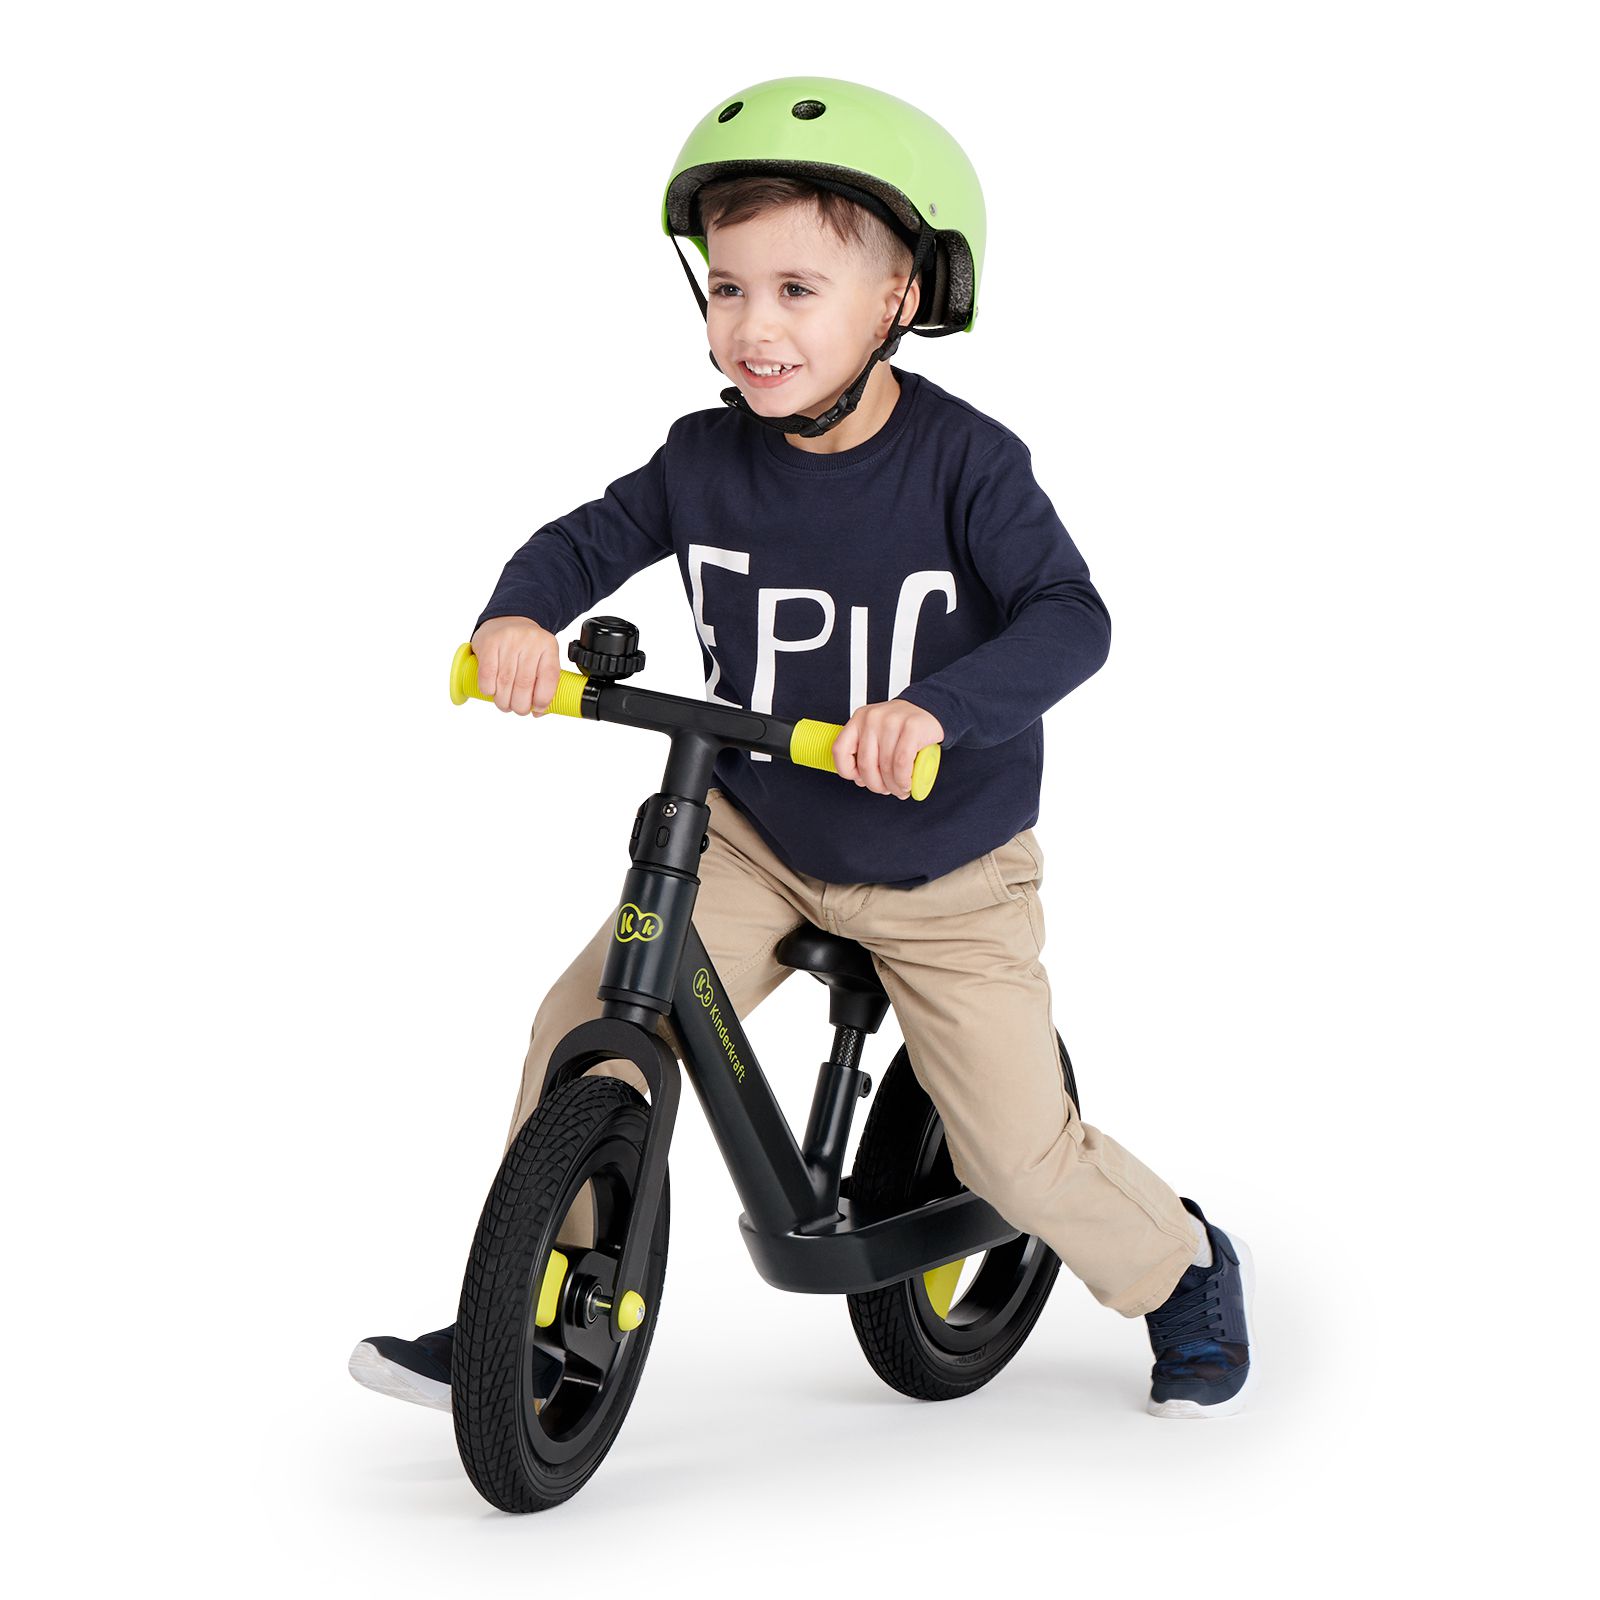 A bike for little athlete